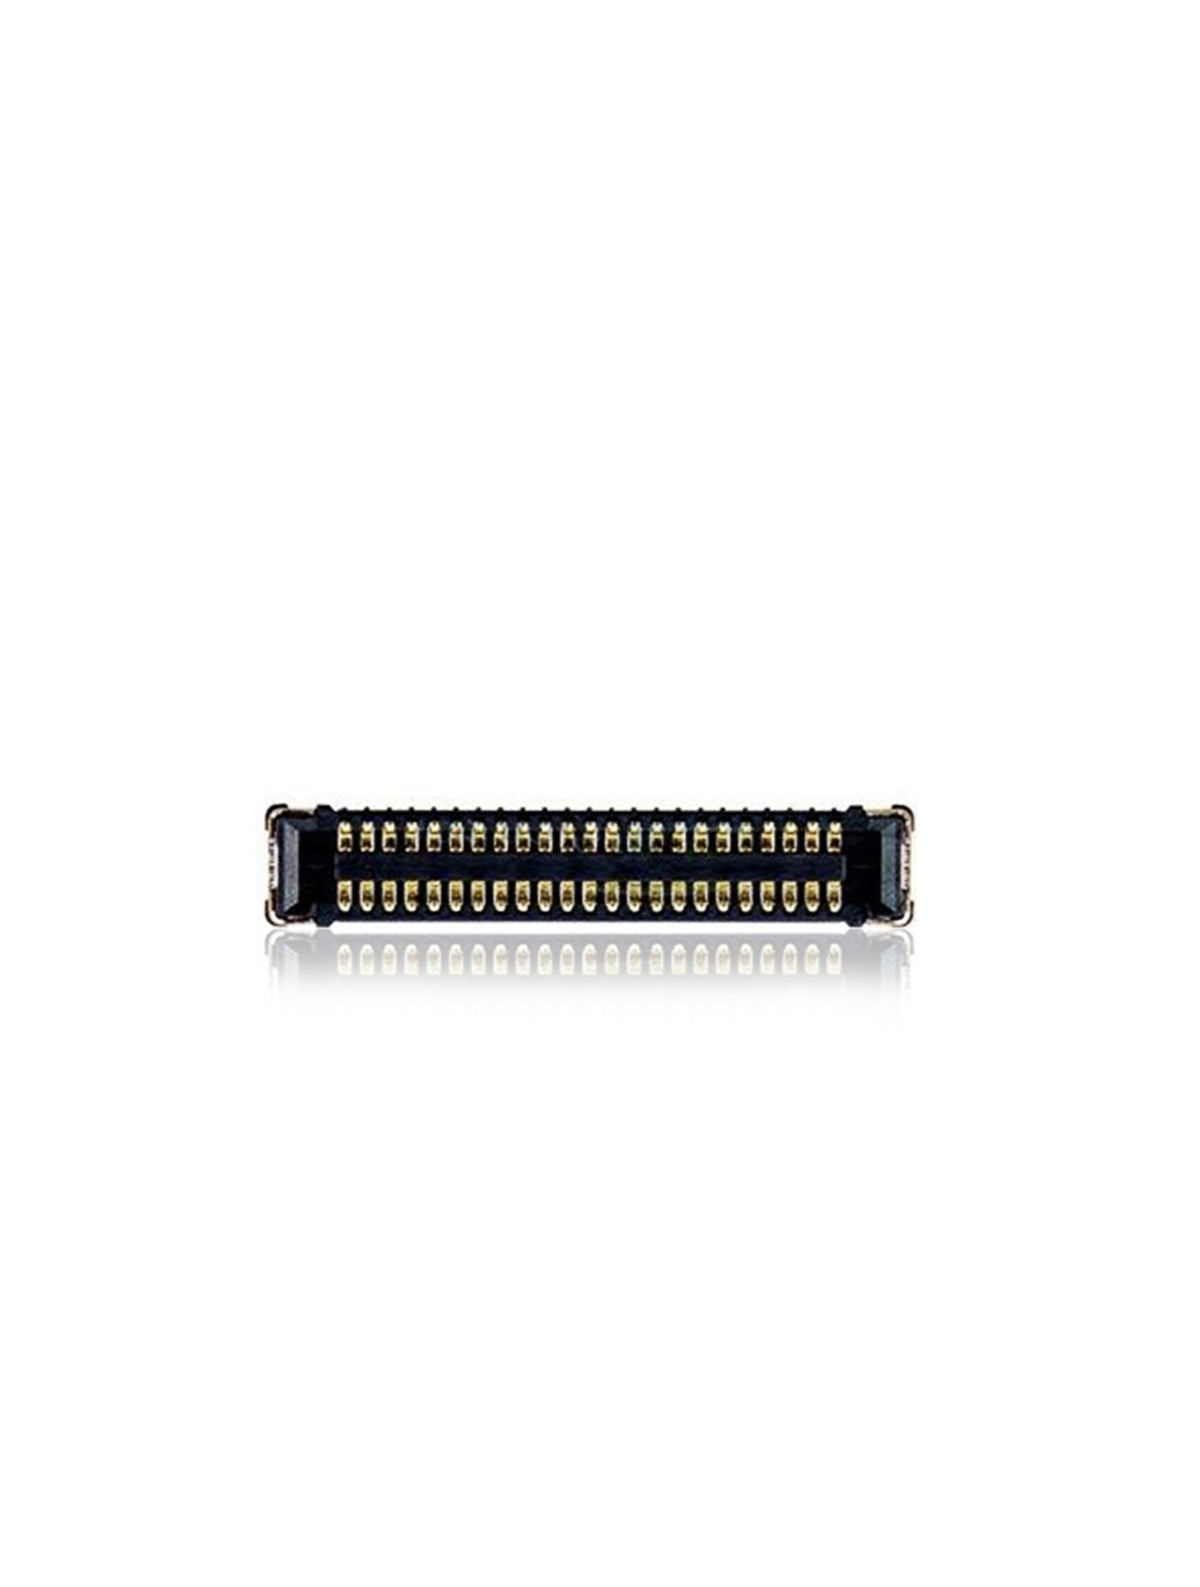 DIGITIZER FPC CONNECTOR COMPATIBLE WITH IPHONE 5 (J4: 42 PIN)